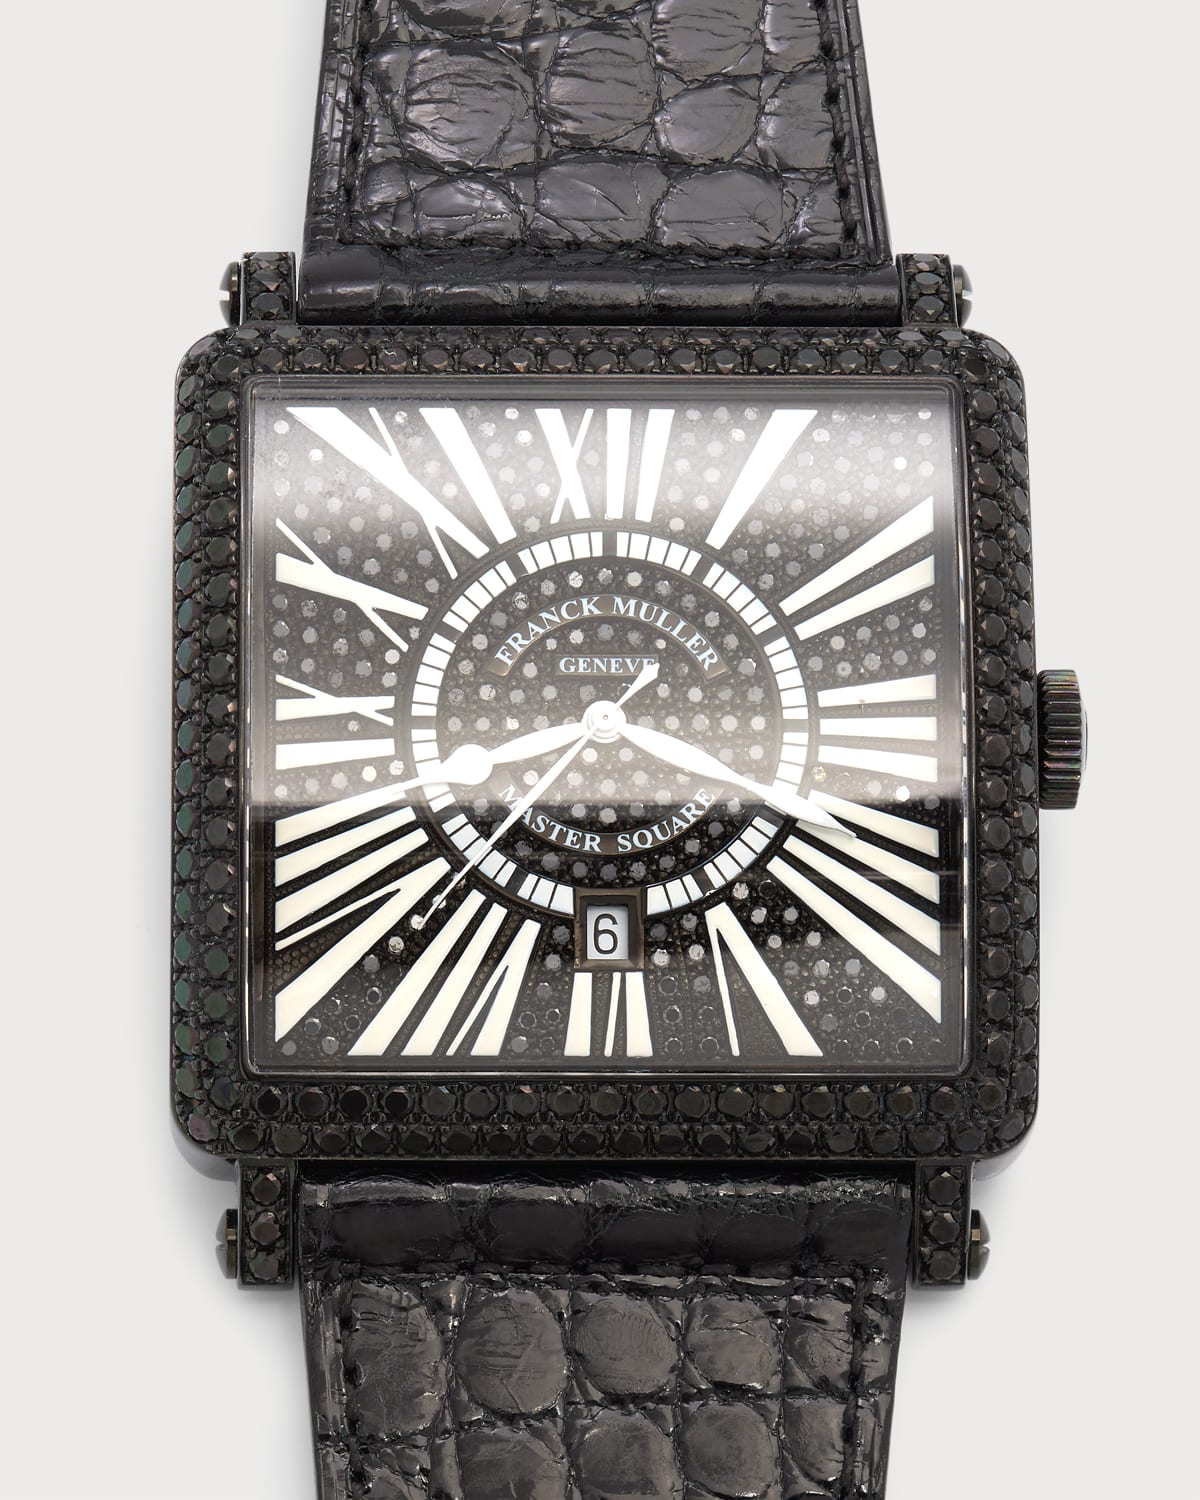 Men's King Master Square Watch with Black Diamonds